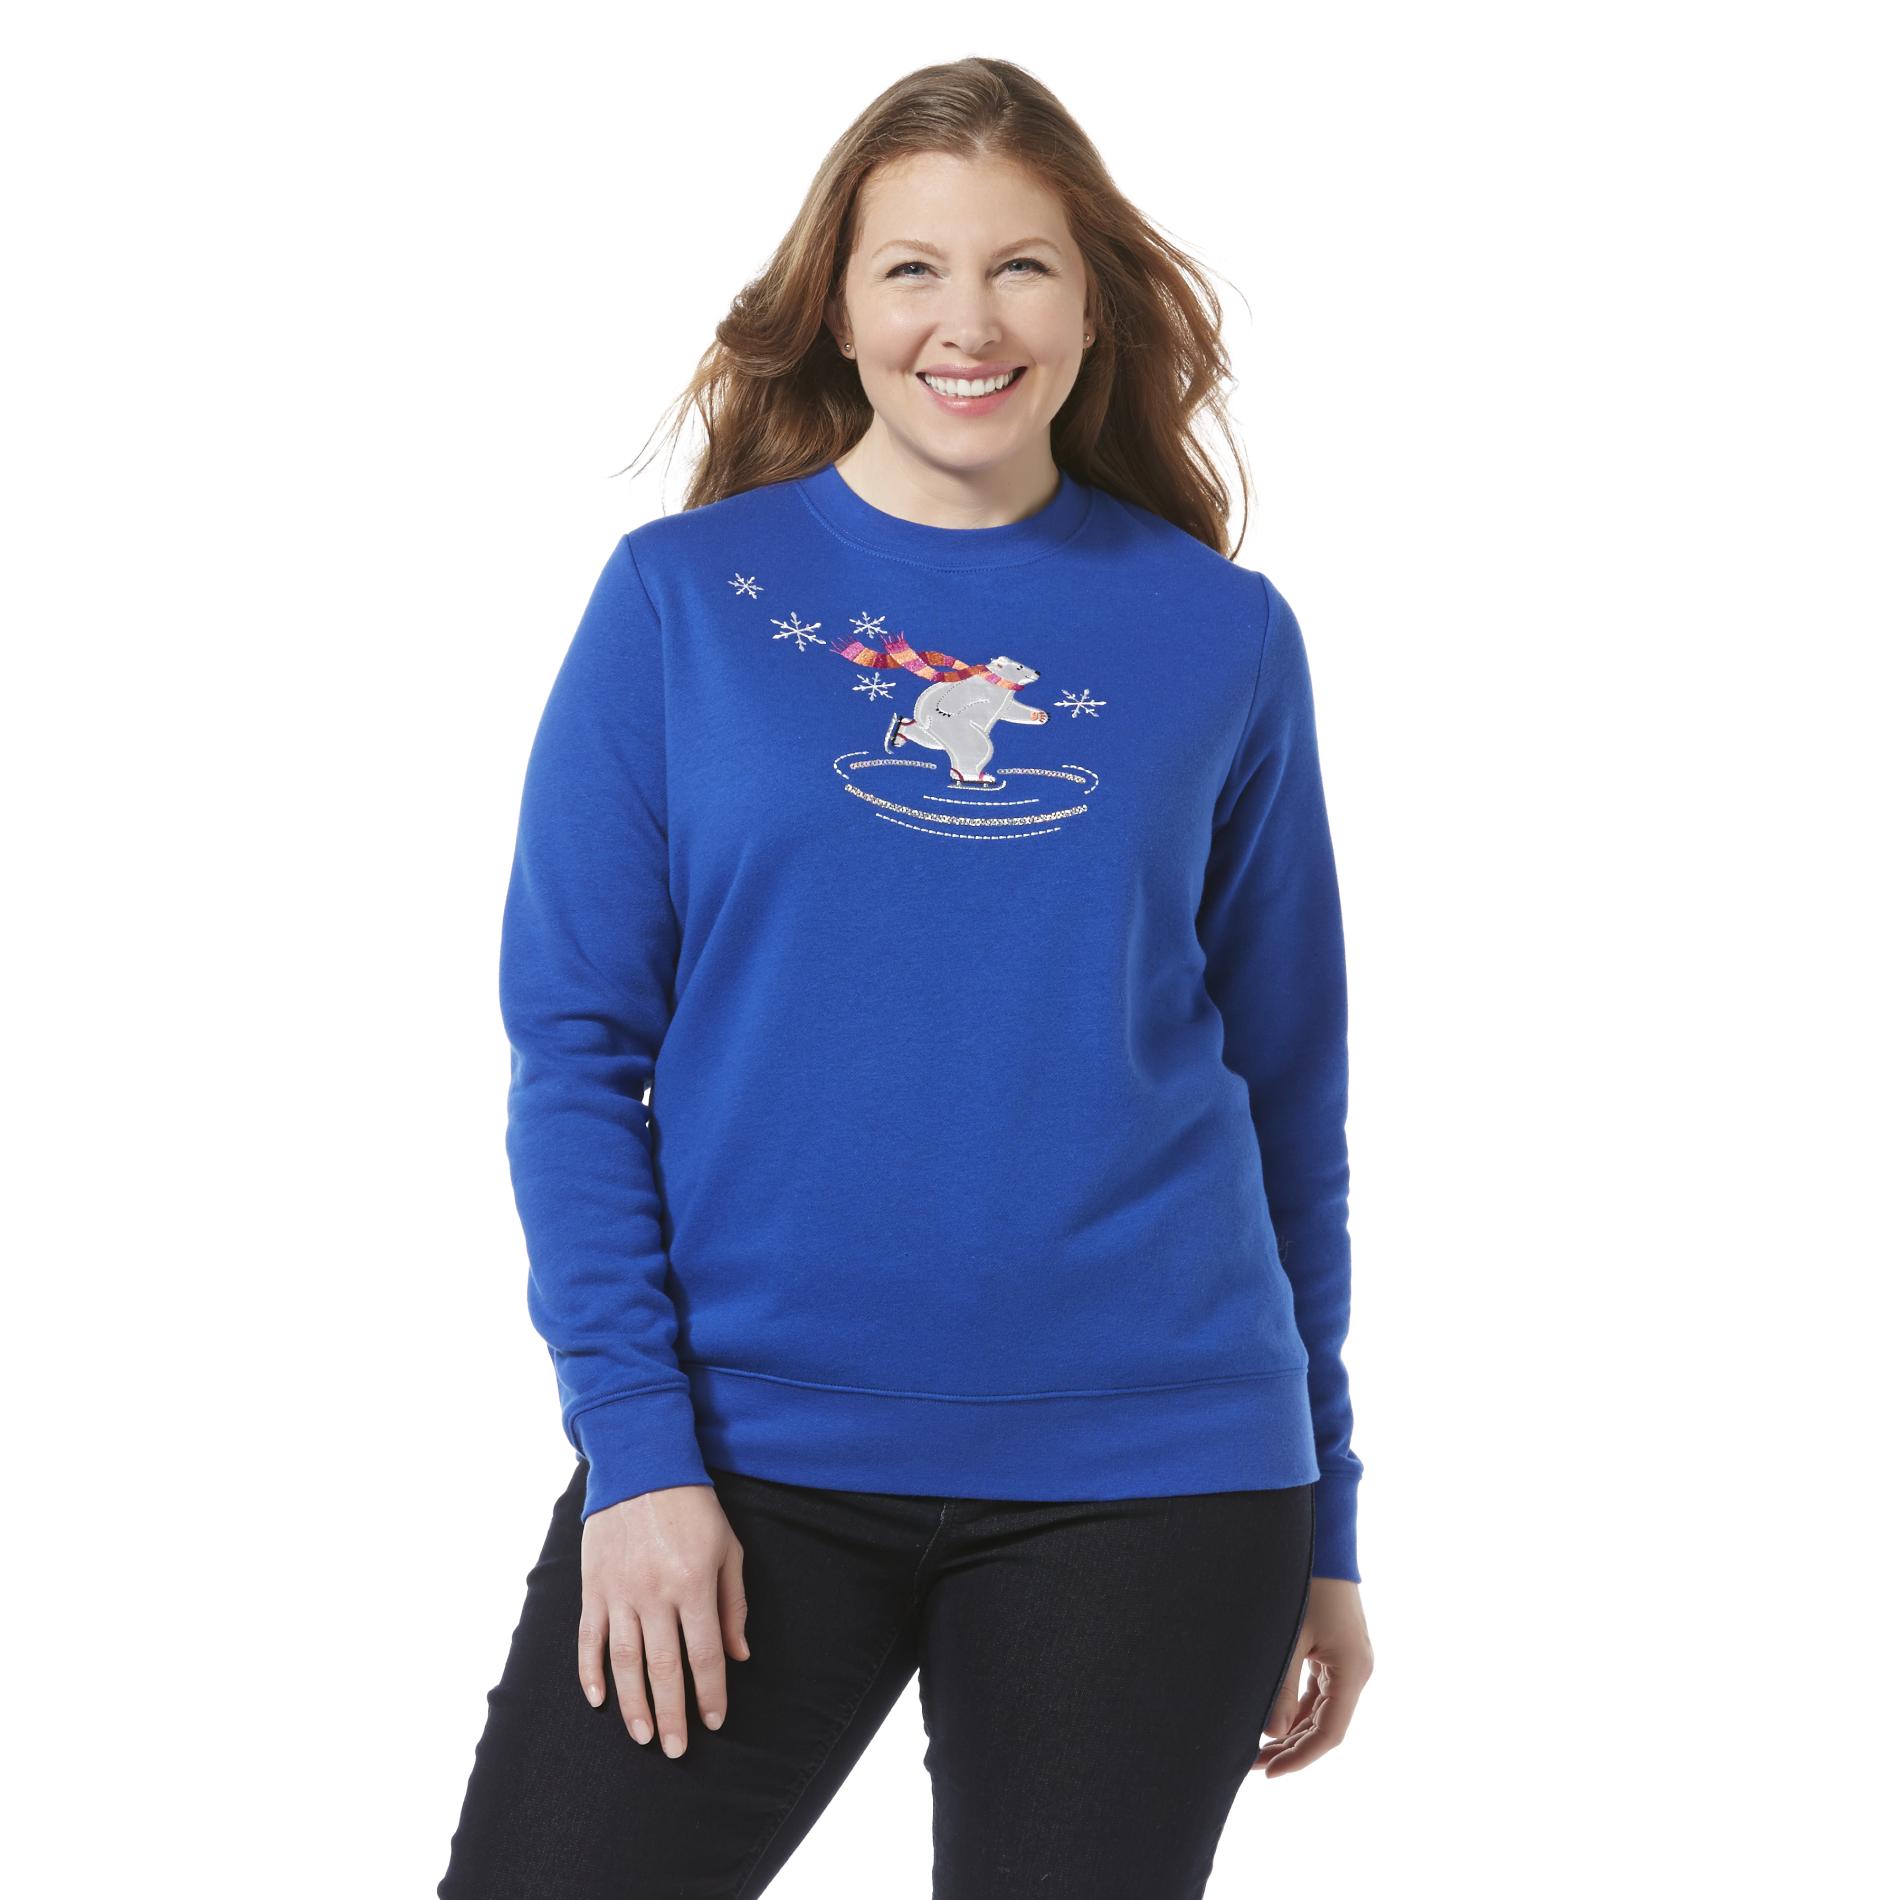 Holiday Editions Women's Plus Embroidered Sweatshirt